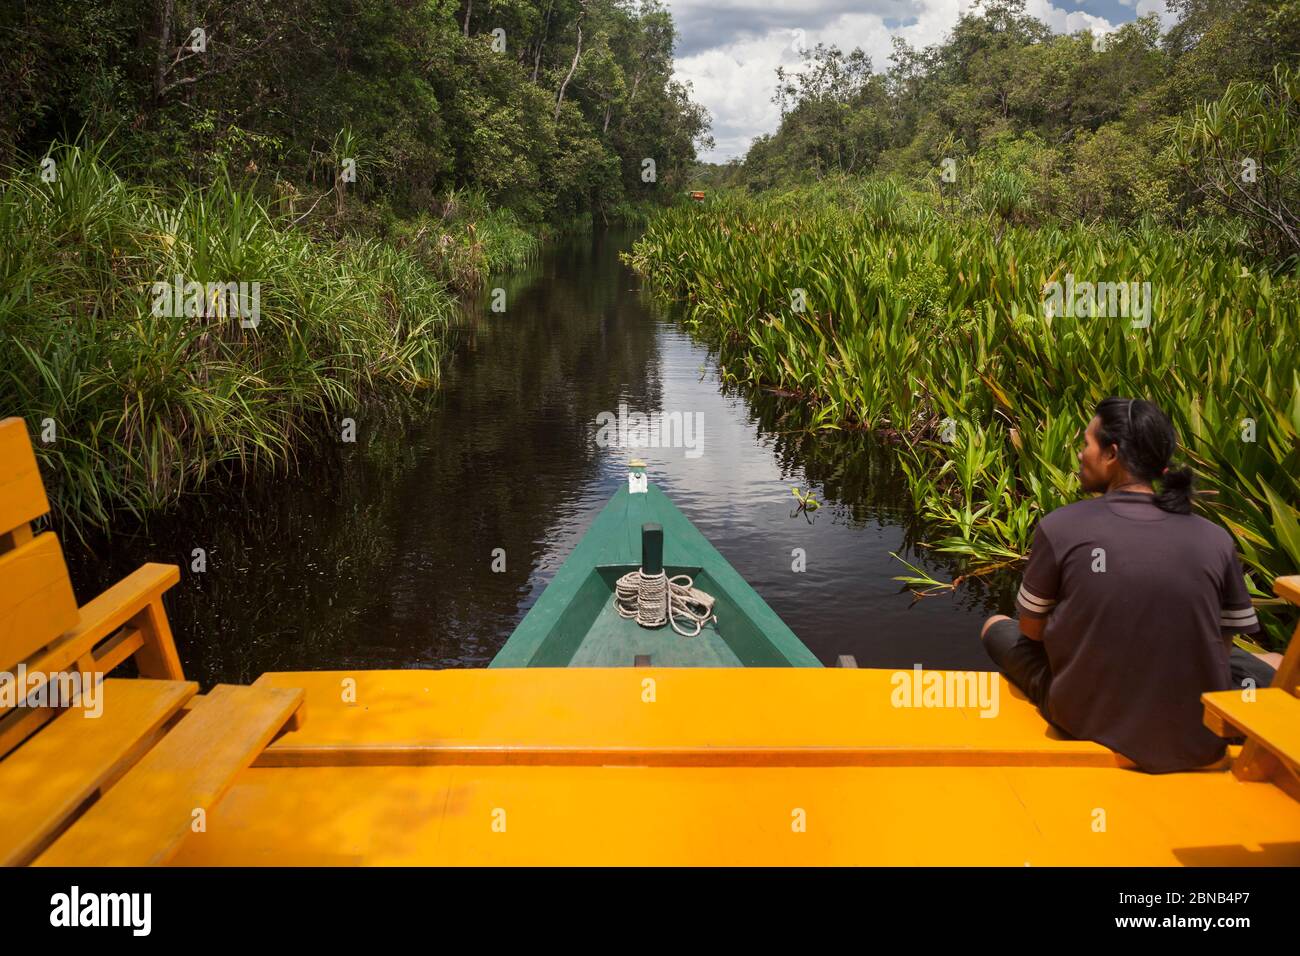 Horizontal view of a man navigating in a traditional wooden Klotok, Sekonyer River, Tanjung Puting National Park, Centra Kalimantan, Borneo, Indonesia Stock Photo